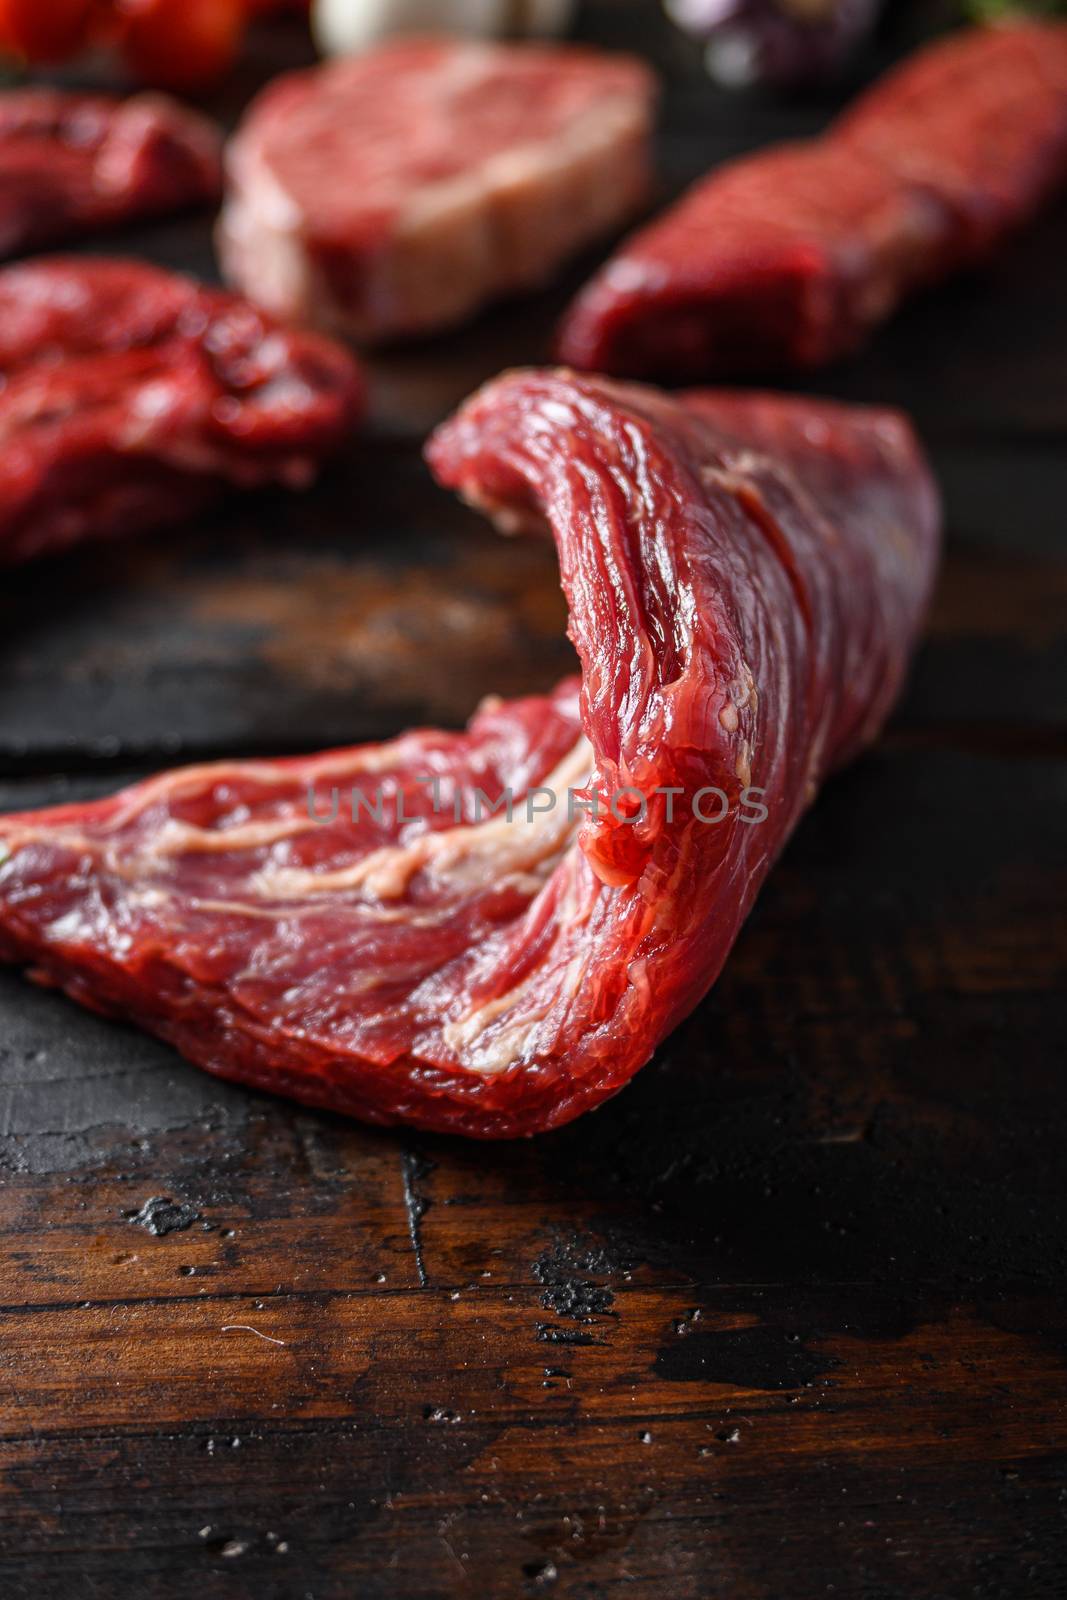 Bio Flank bavette or flap steak beef t steak near tri-tip and top blade oyster cuts close up in front of other cuts in butchery on old wood table side view selective focus by Ilianesolenyi